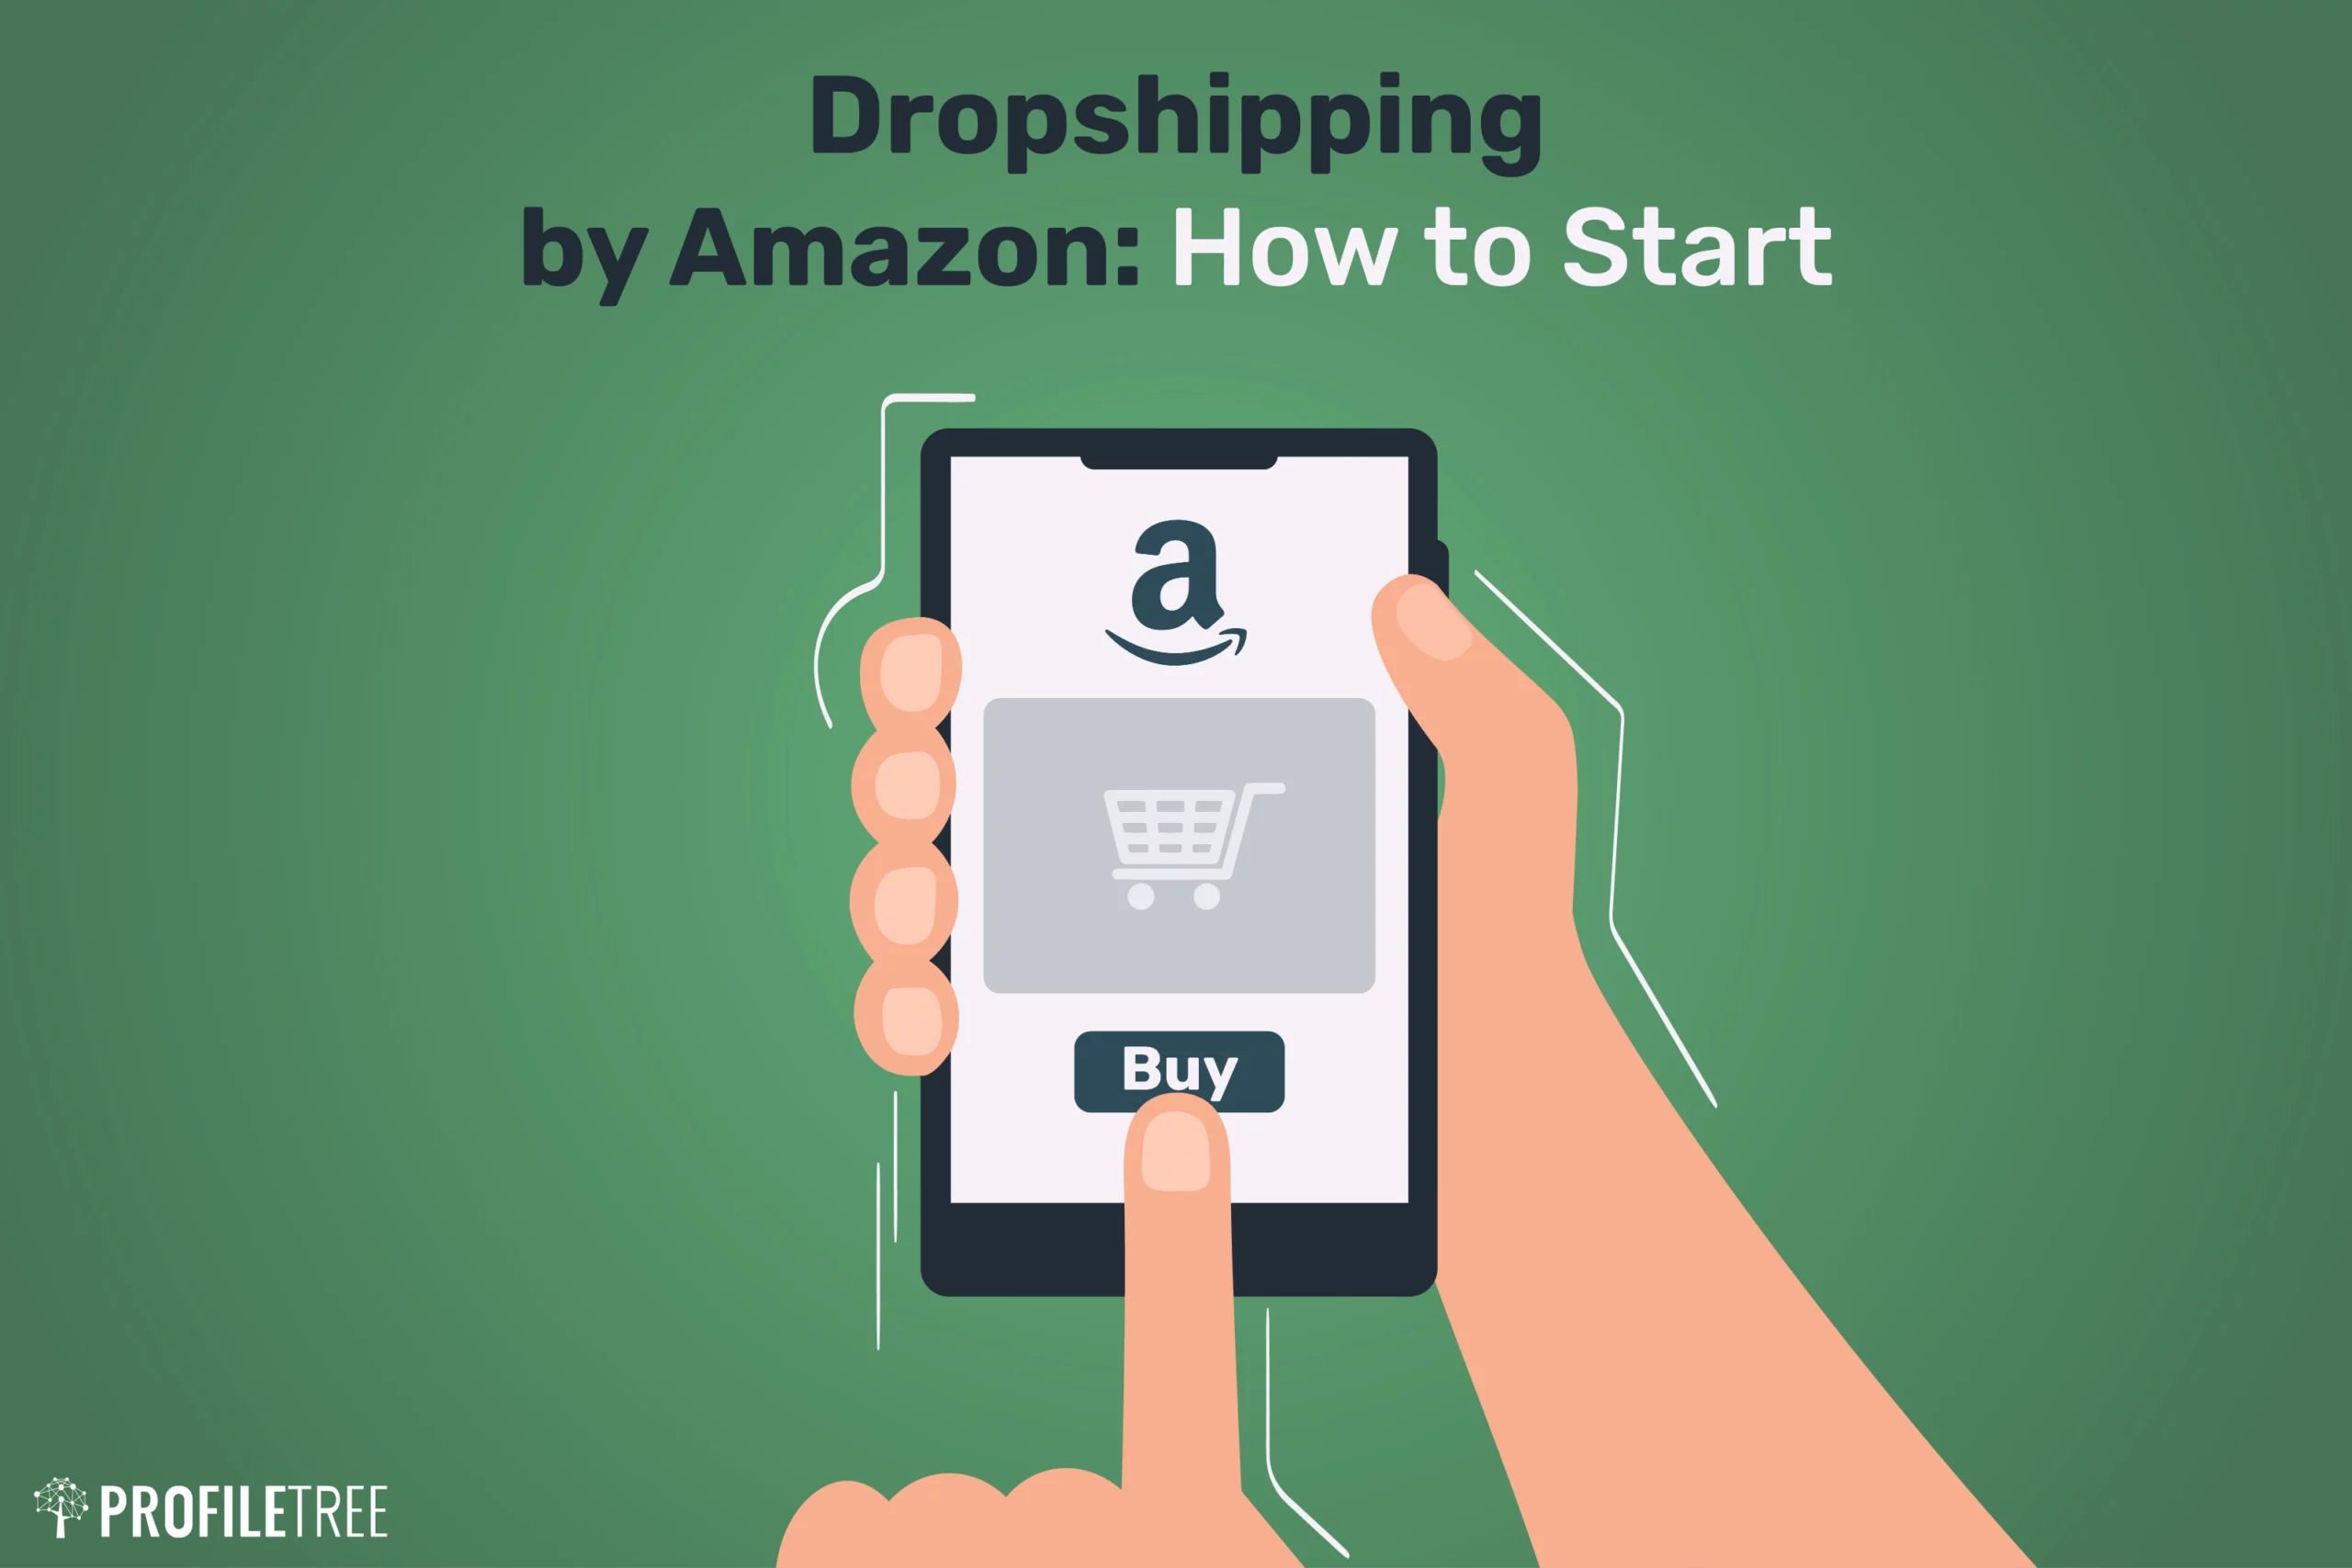 Dropshipping by Amazon